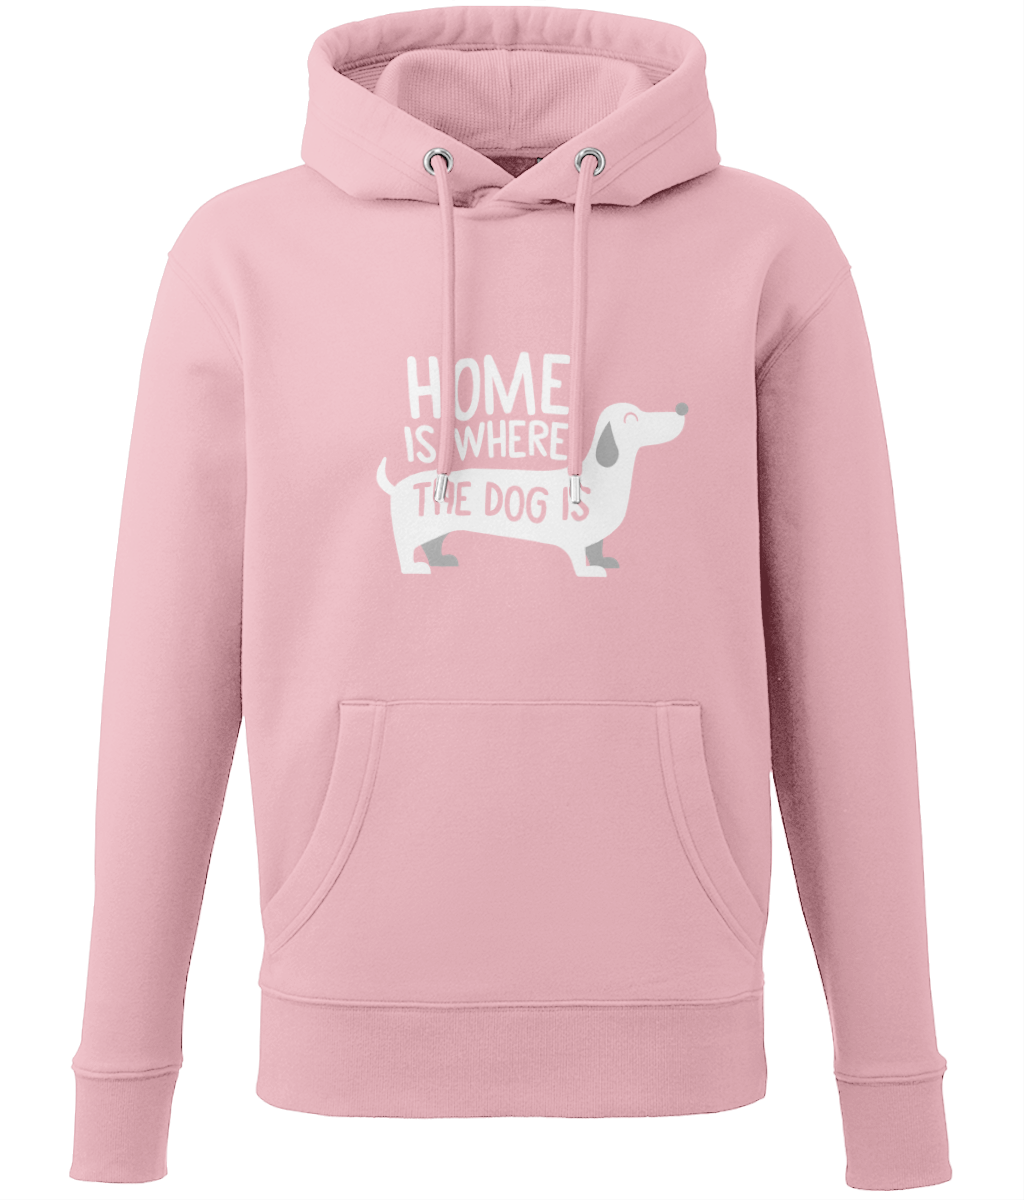 BMDR "Home is Where The Dog is" Hoodie - Unisex